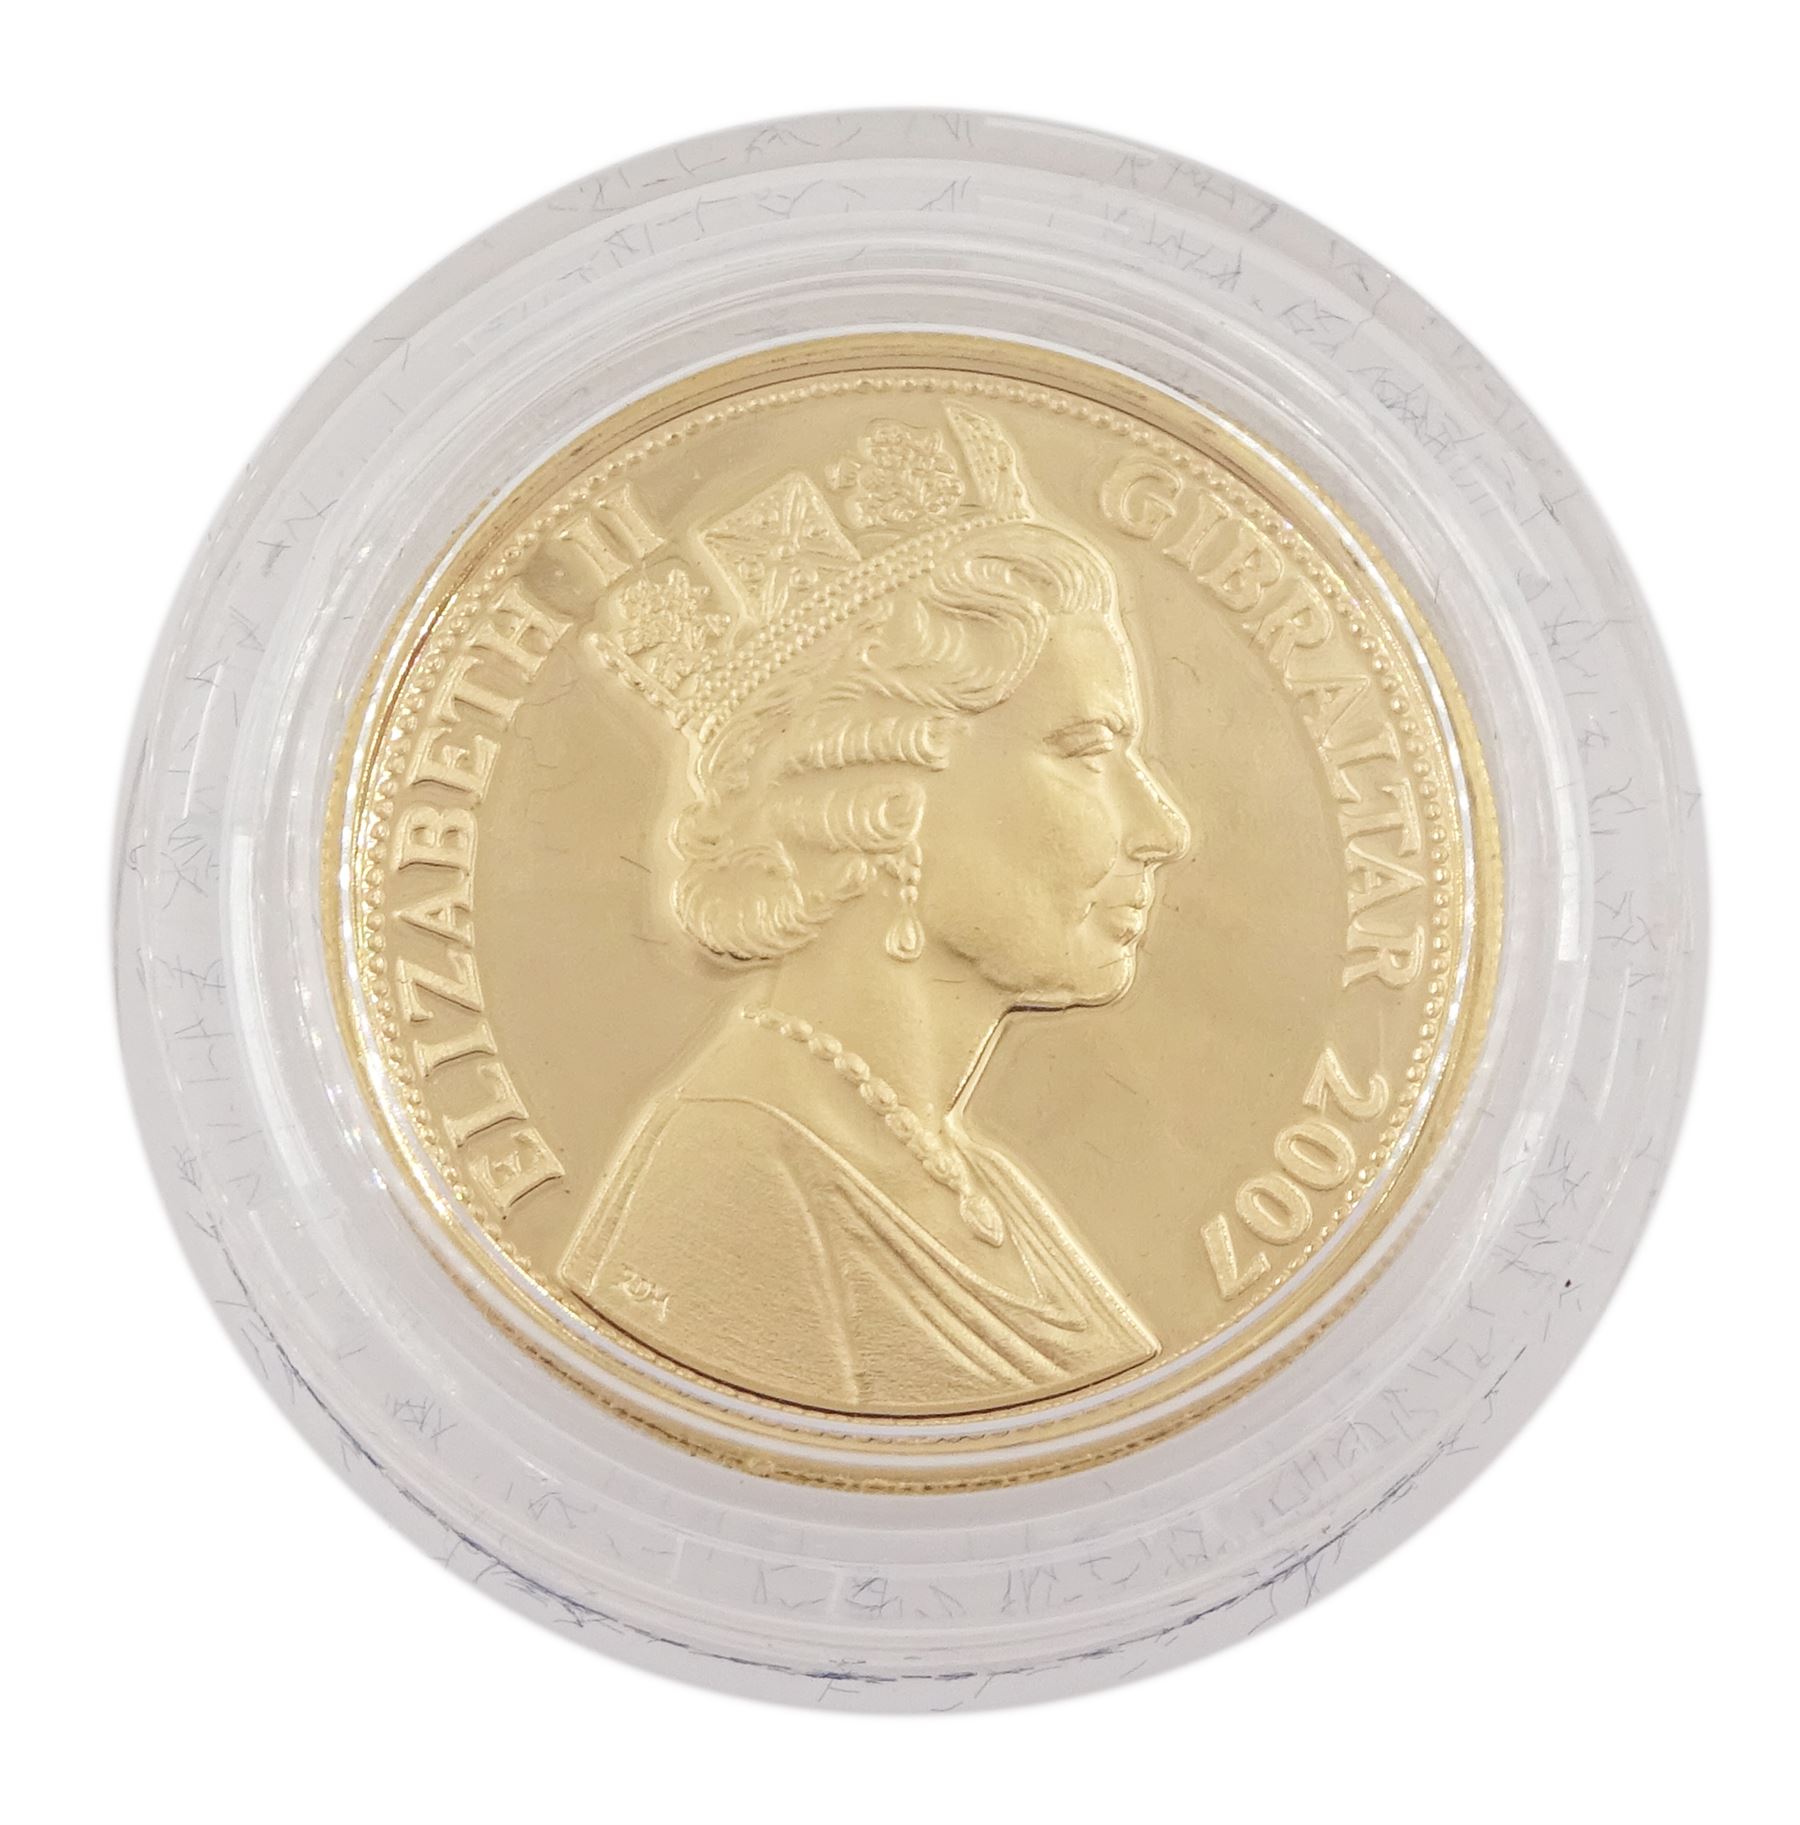 Queen Elizabeth II 2007 Gibraltar 22ct gold one pound coin commemorating 'The Diamond Wedding Annive - Image 2 of 3